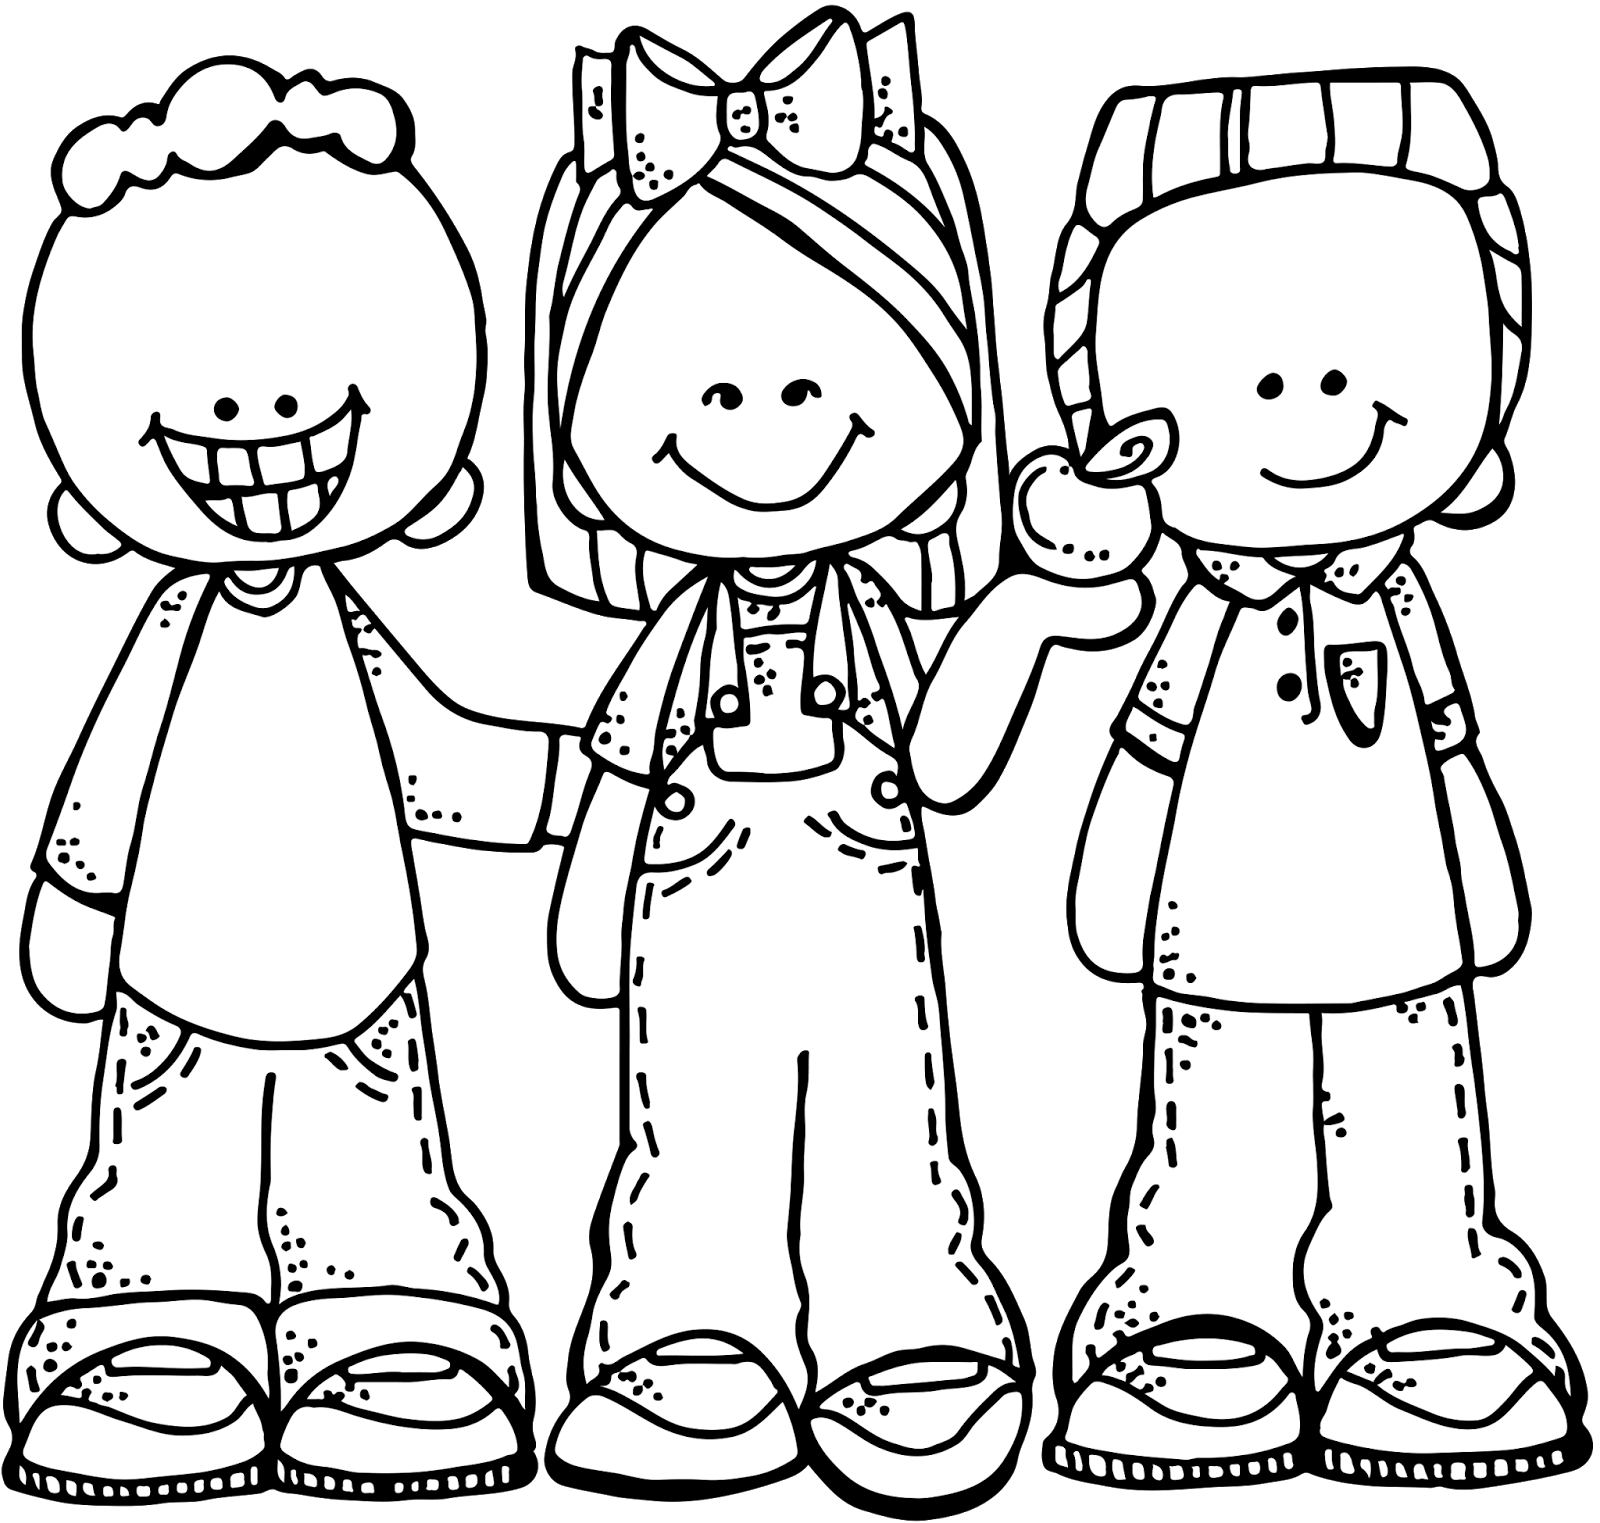 Kindness clipart black and white, Kindness black and white